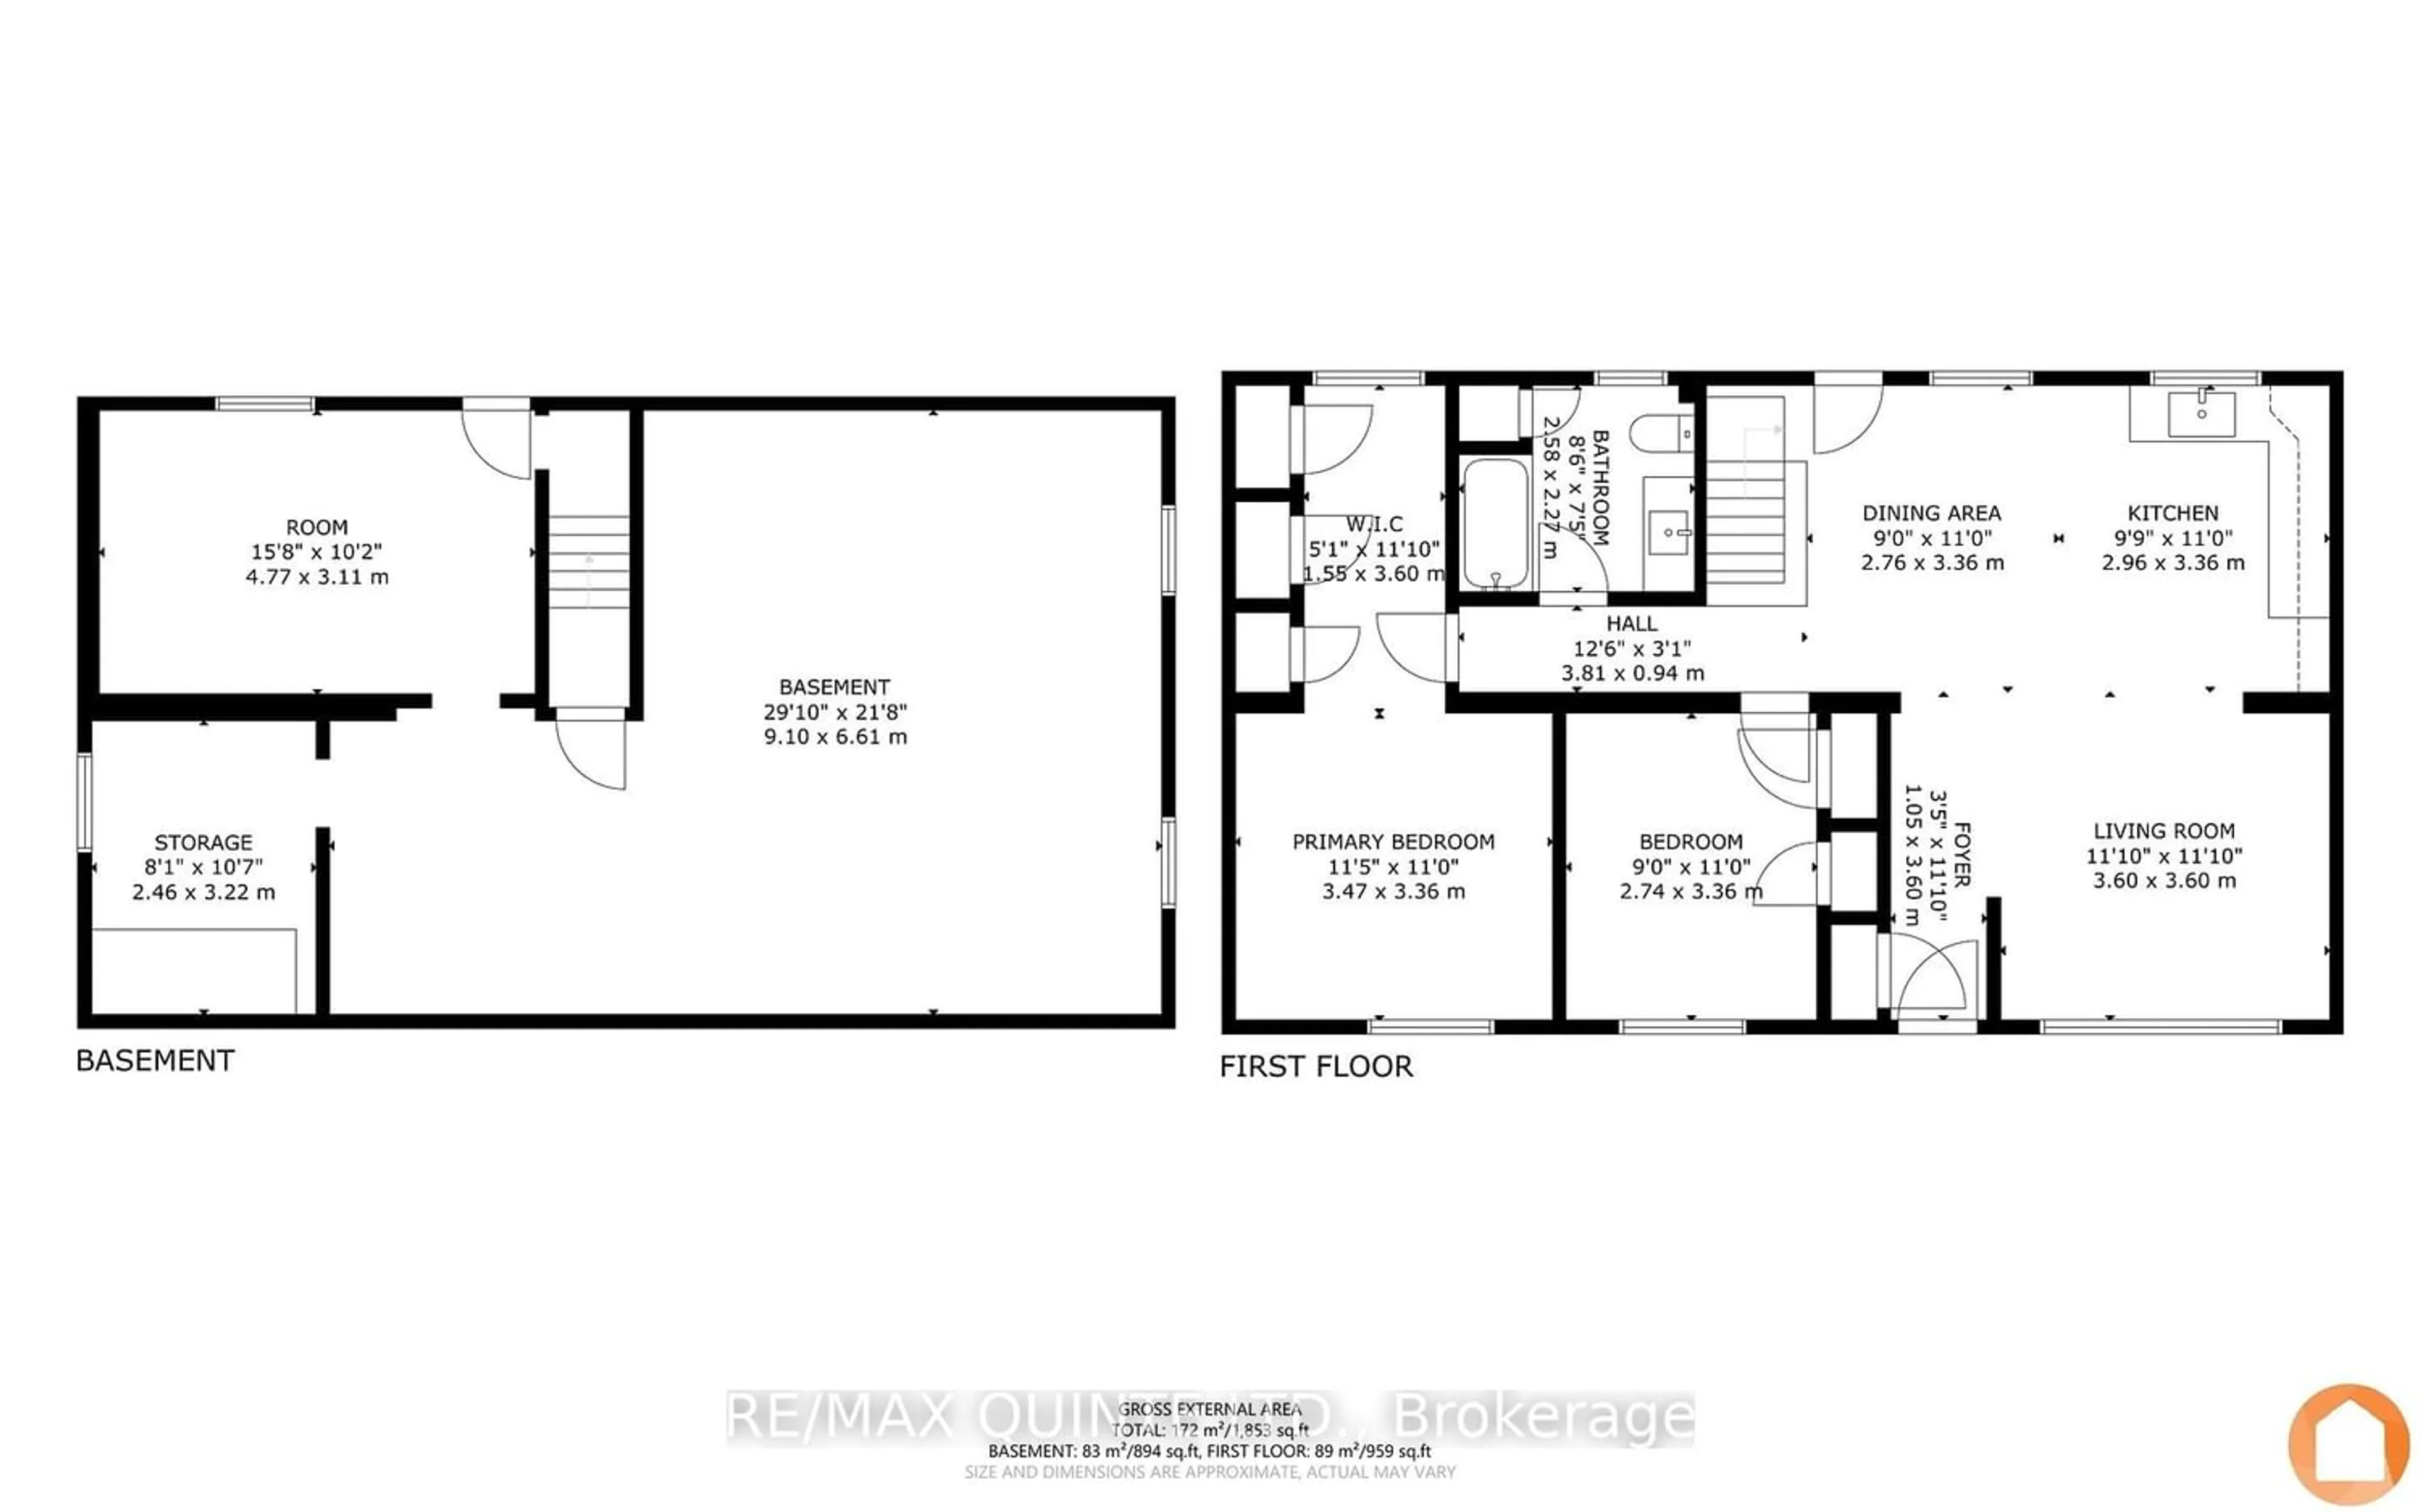 Floor plan for 1707 County Rd 19 Consecon, Prince Edward County Ontario K0K 1T0